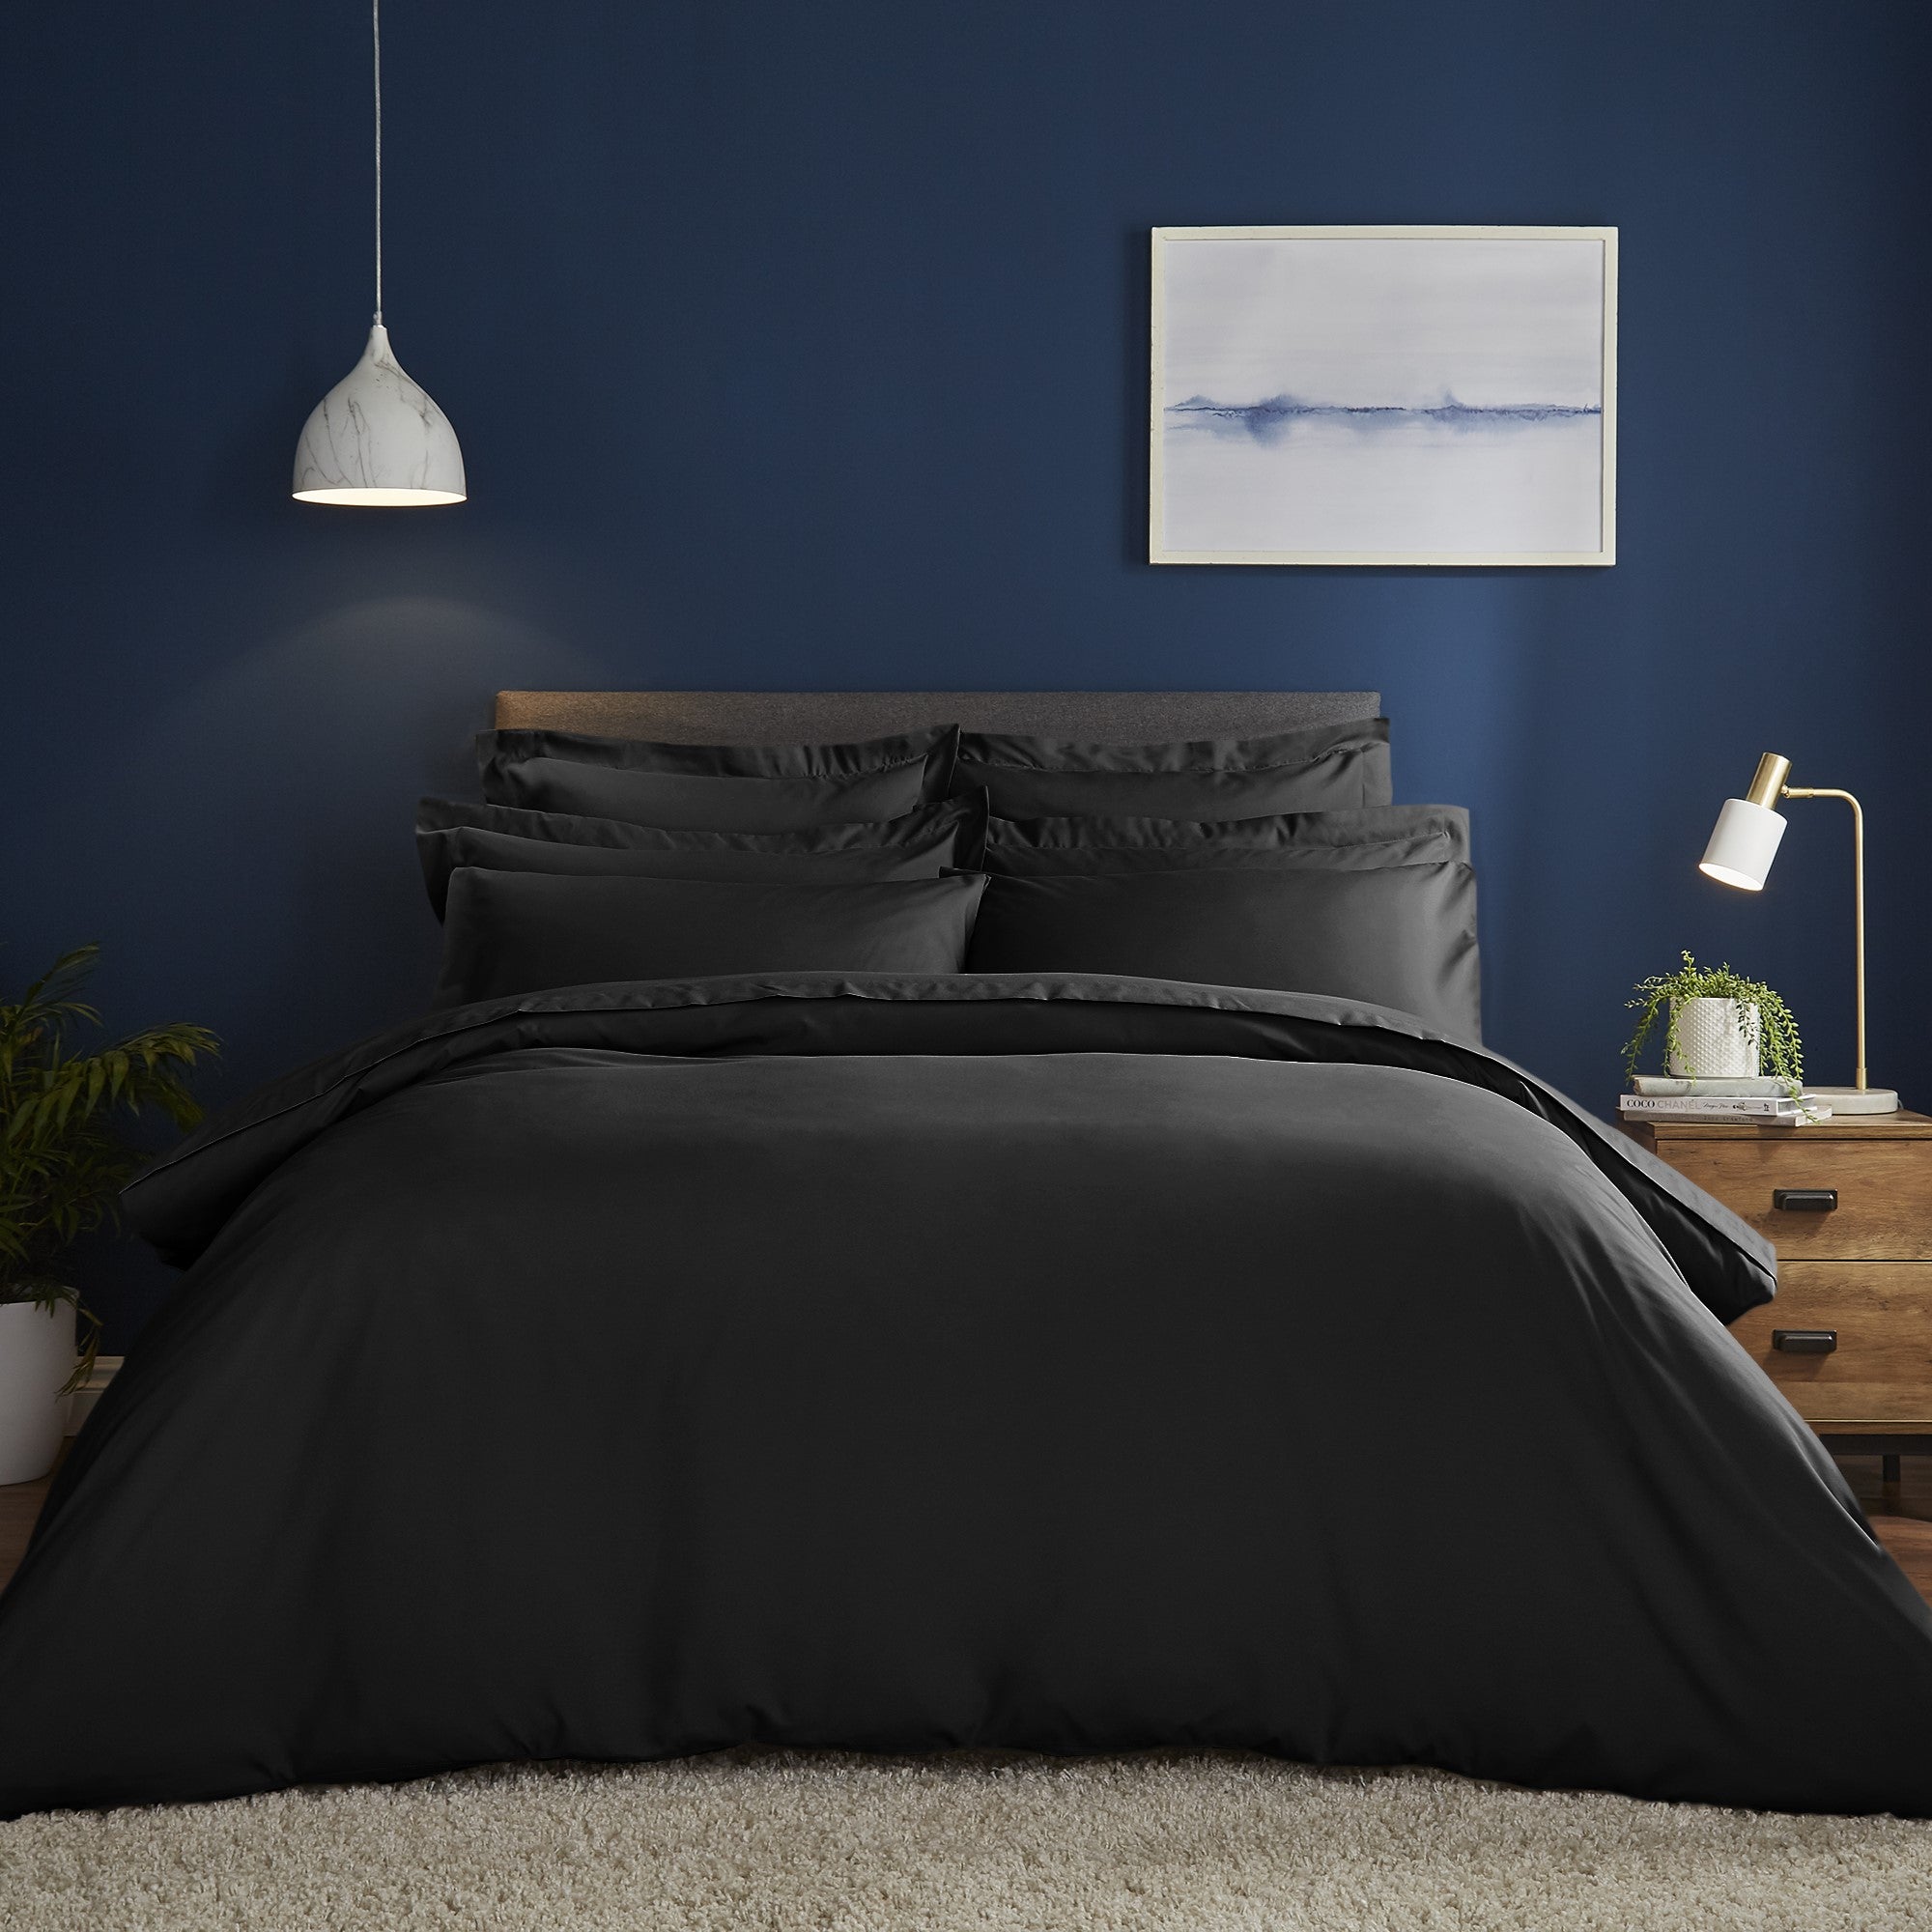 Fogarty Soft Touch Duvet Cover and Pillowcase Set